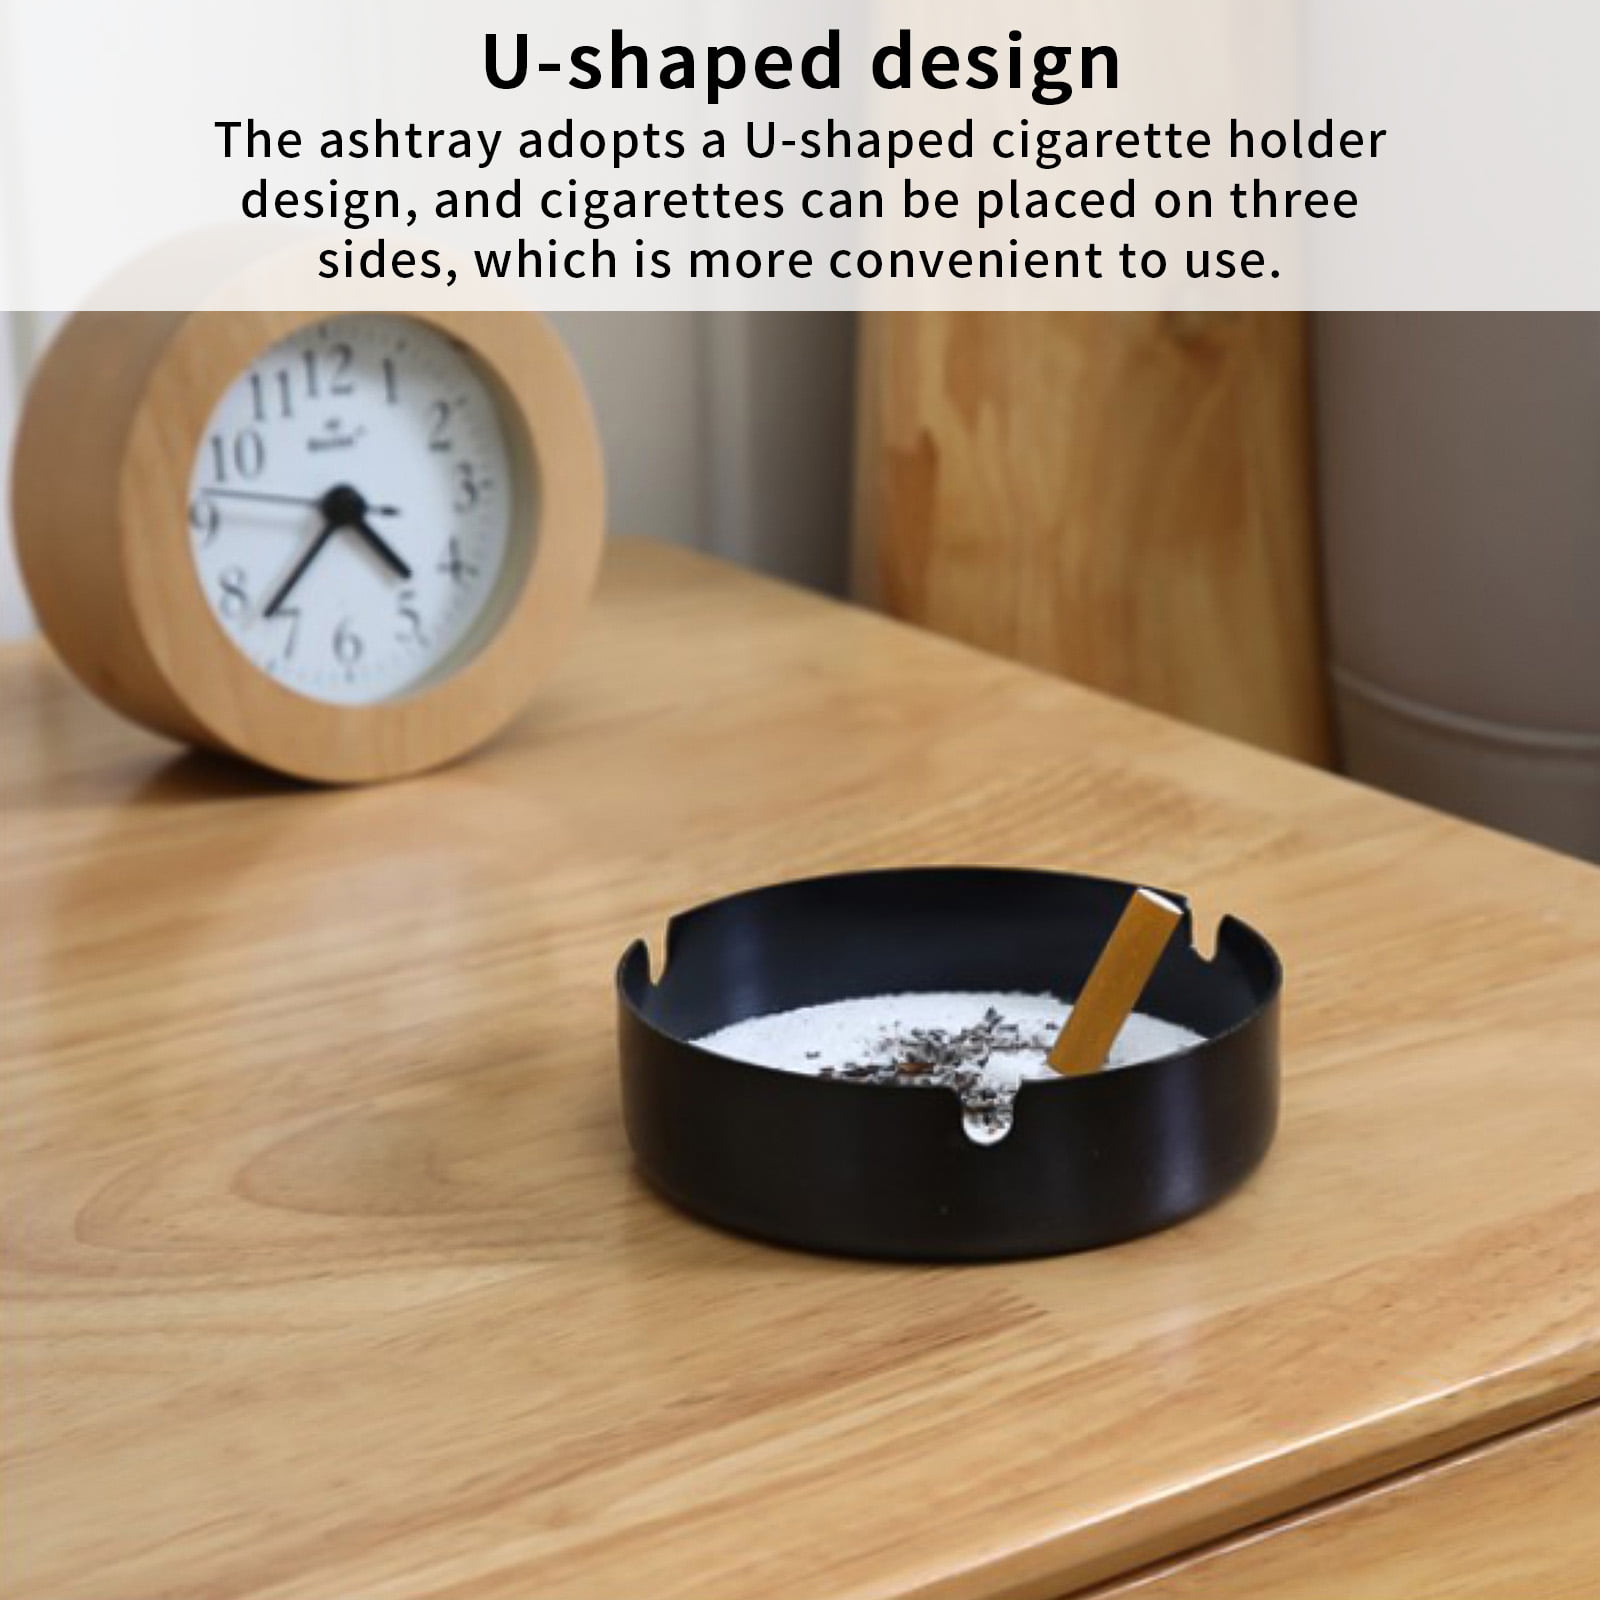 Hesroicy Wall Ashtray Wall-mounted Punch-free Removable Whale Tail Shape  Waterproof Keep Clean Stainless Steel Detachable Bathroom Ashtray Household  Stuff 